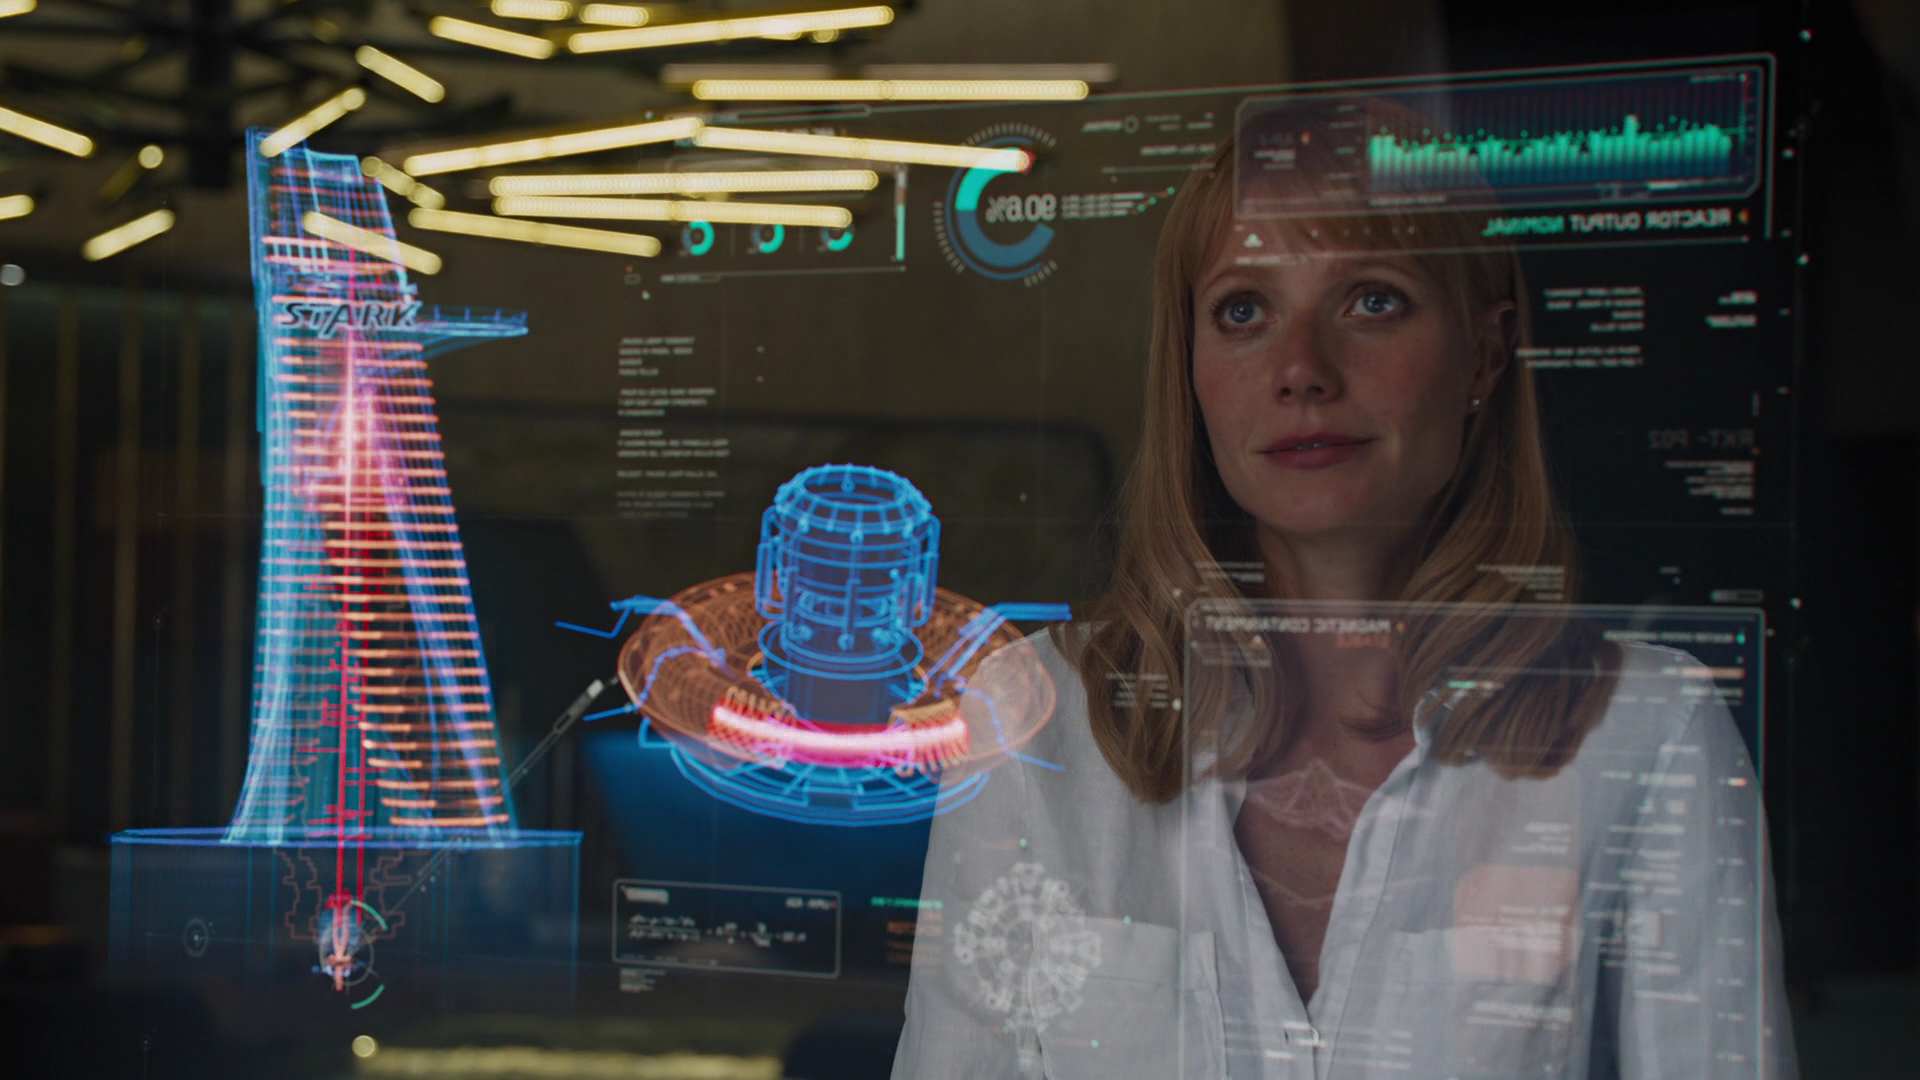 Avengers 4 theory: Pepper Potts will save the heroes from gigantic